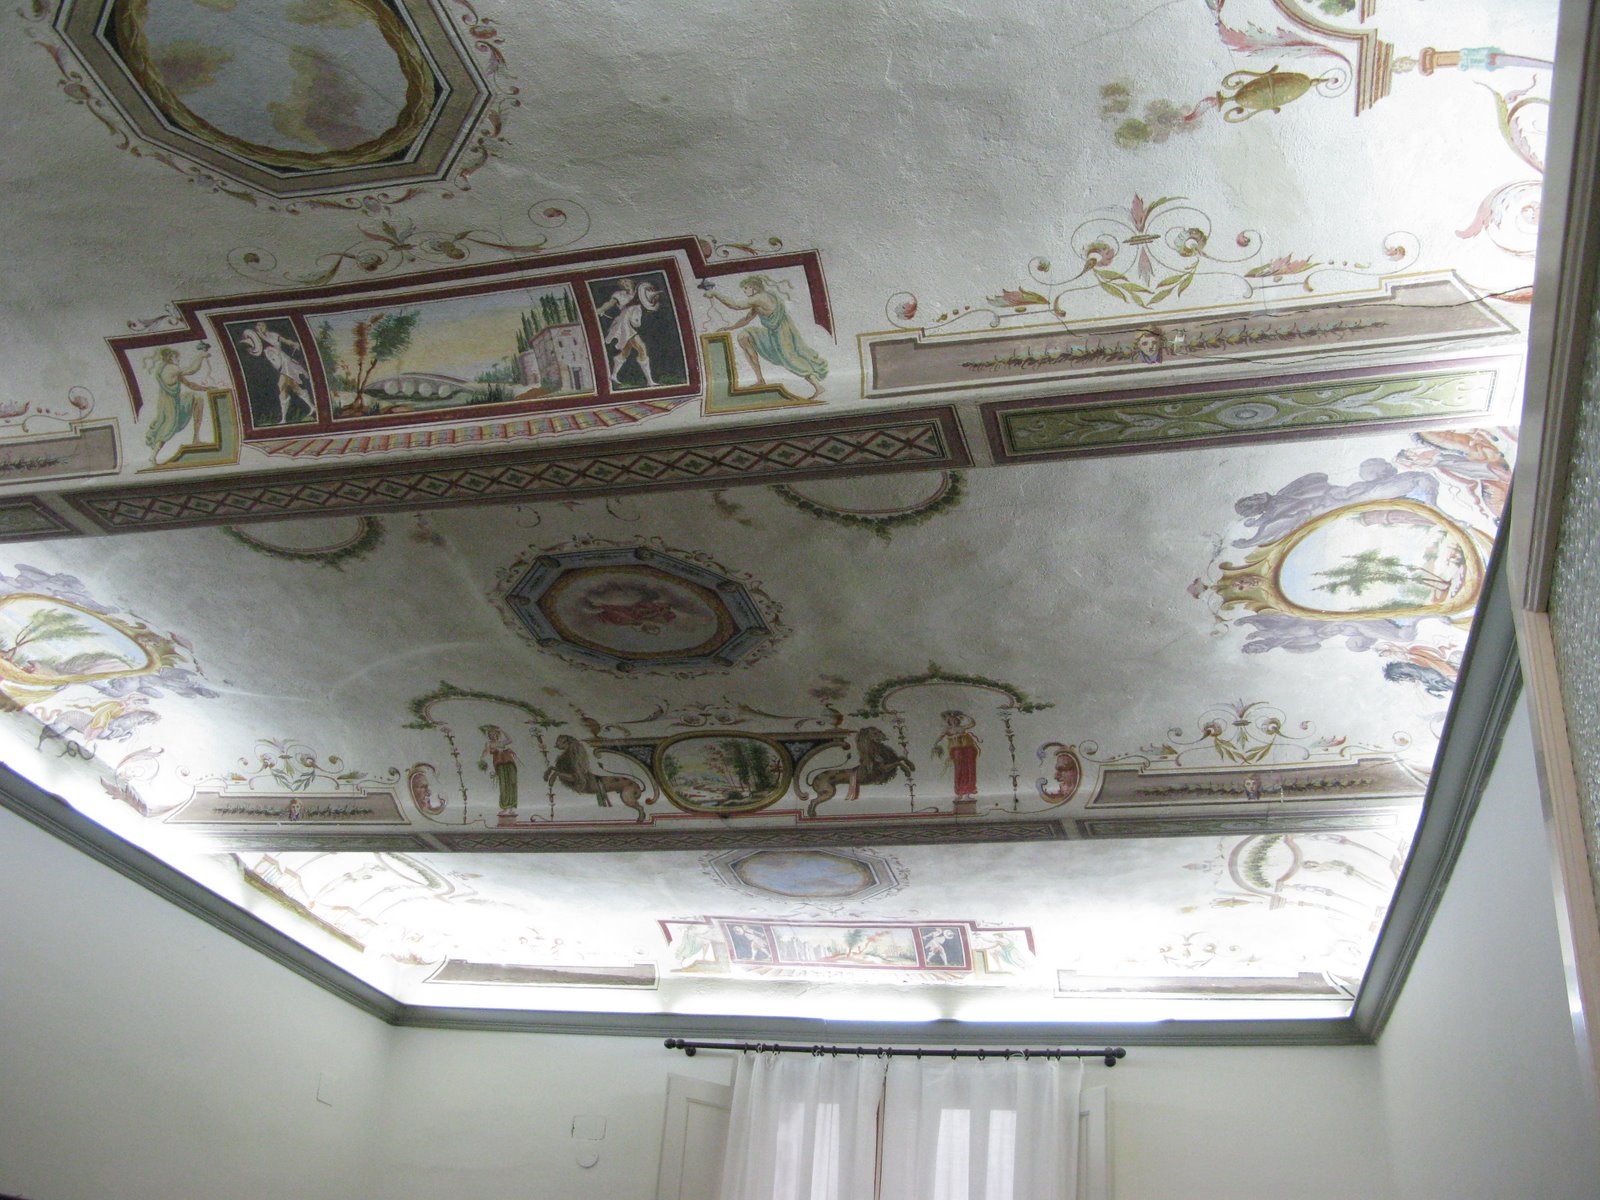 Frescoes on the ceiling